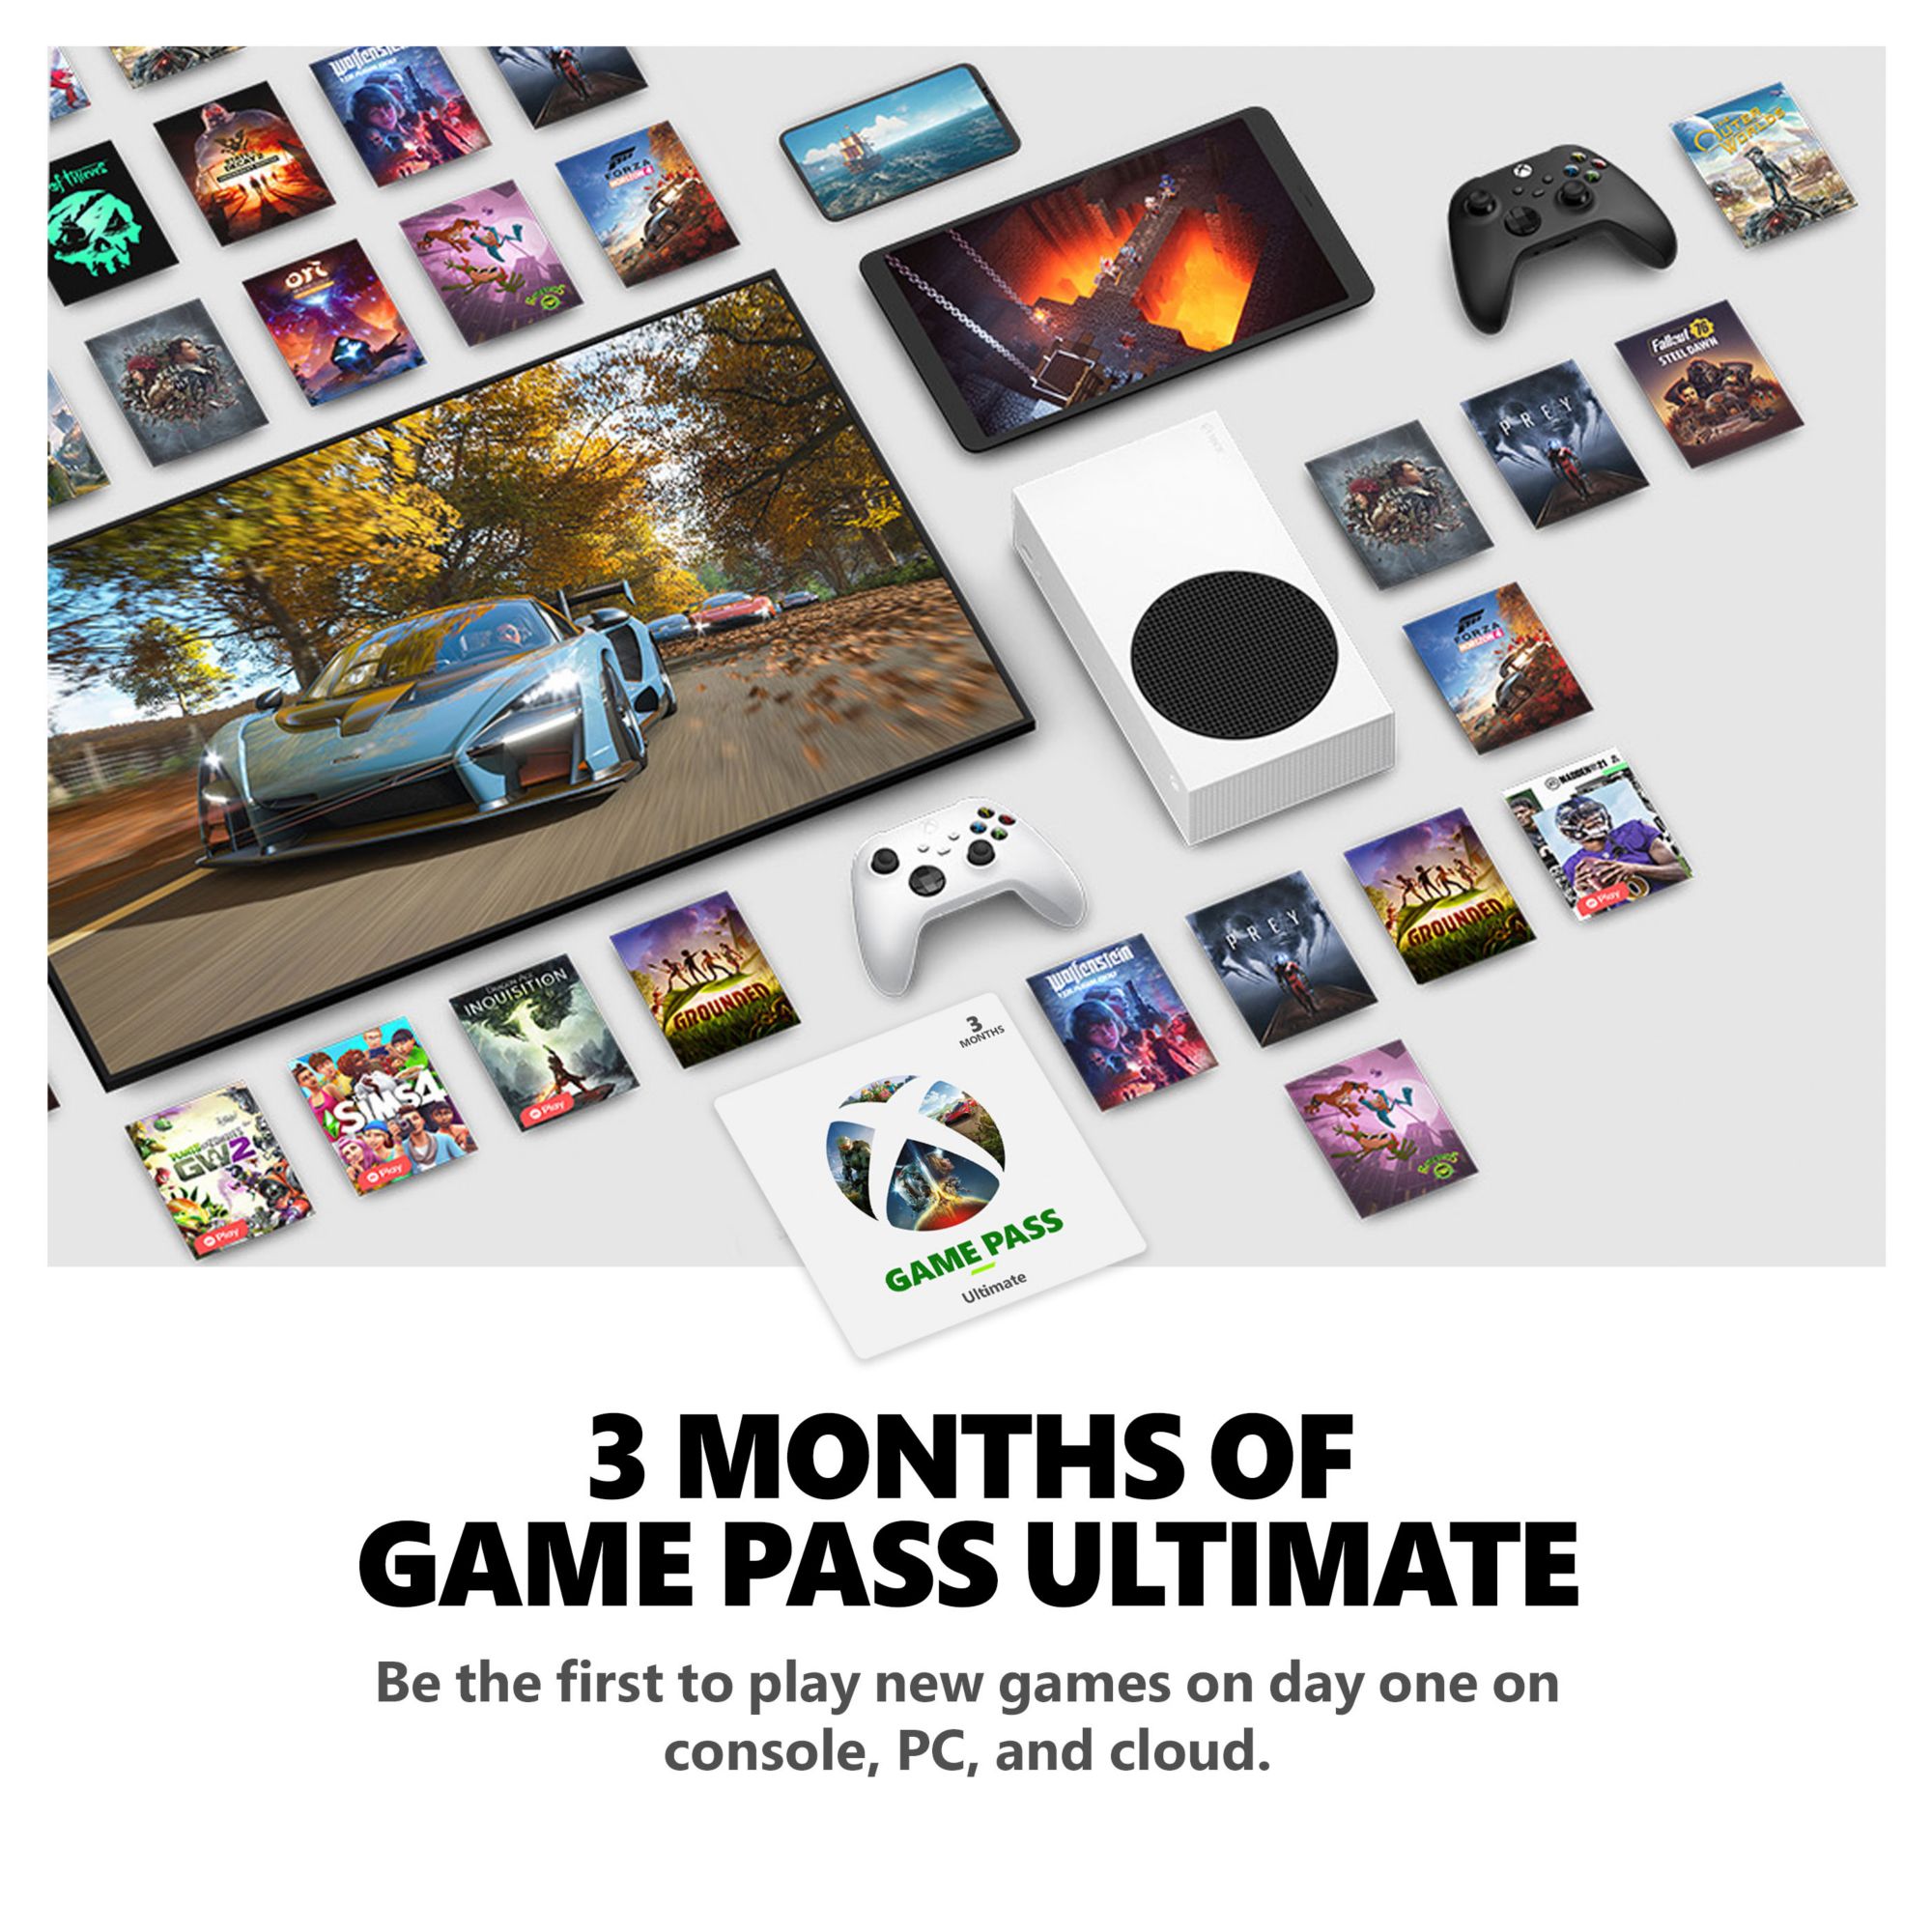  Xbox Game Pass Ultimate – 3 Month Membership – Xbox